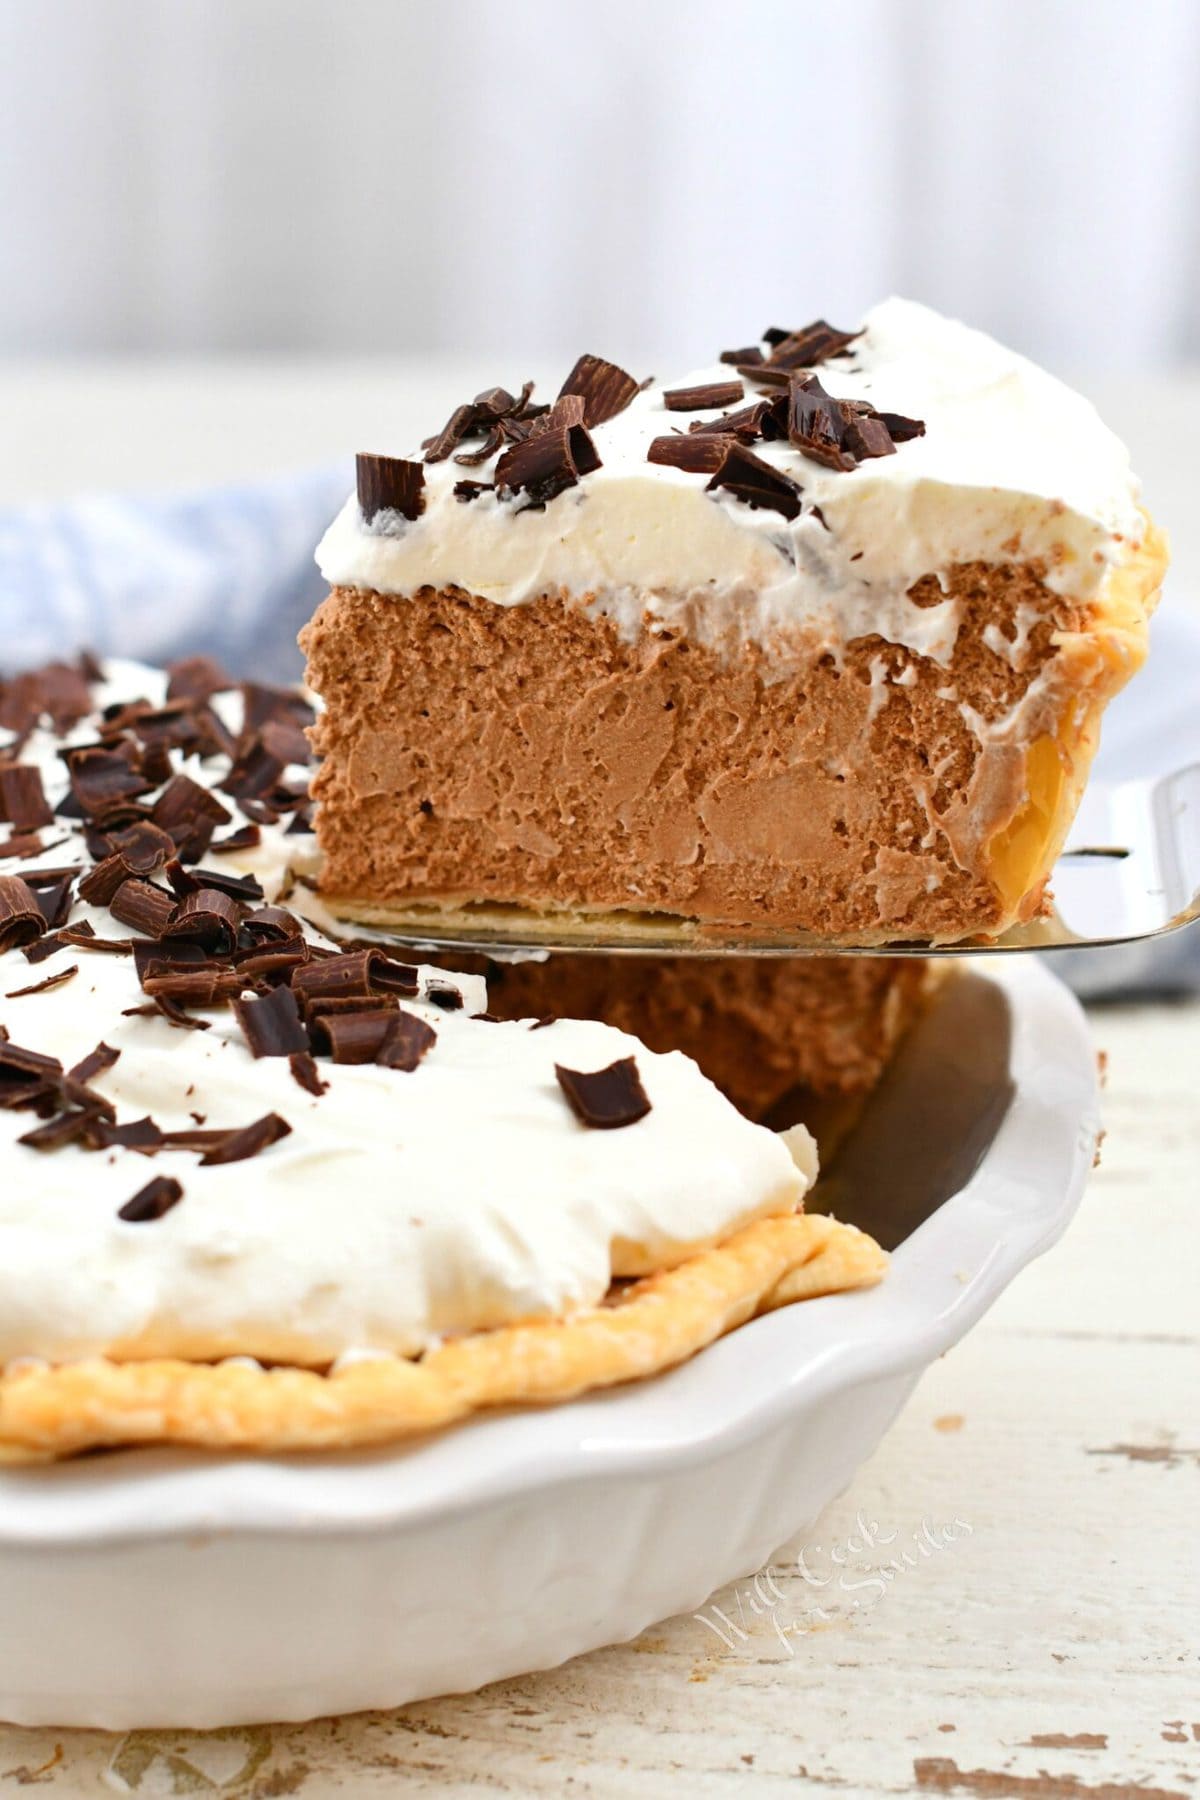 French Silk Pie - Learn To Make This Silky Smooth Chocolate Pie